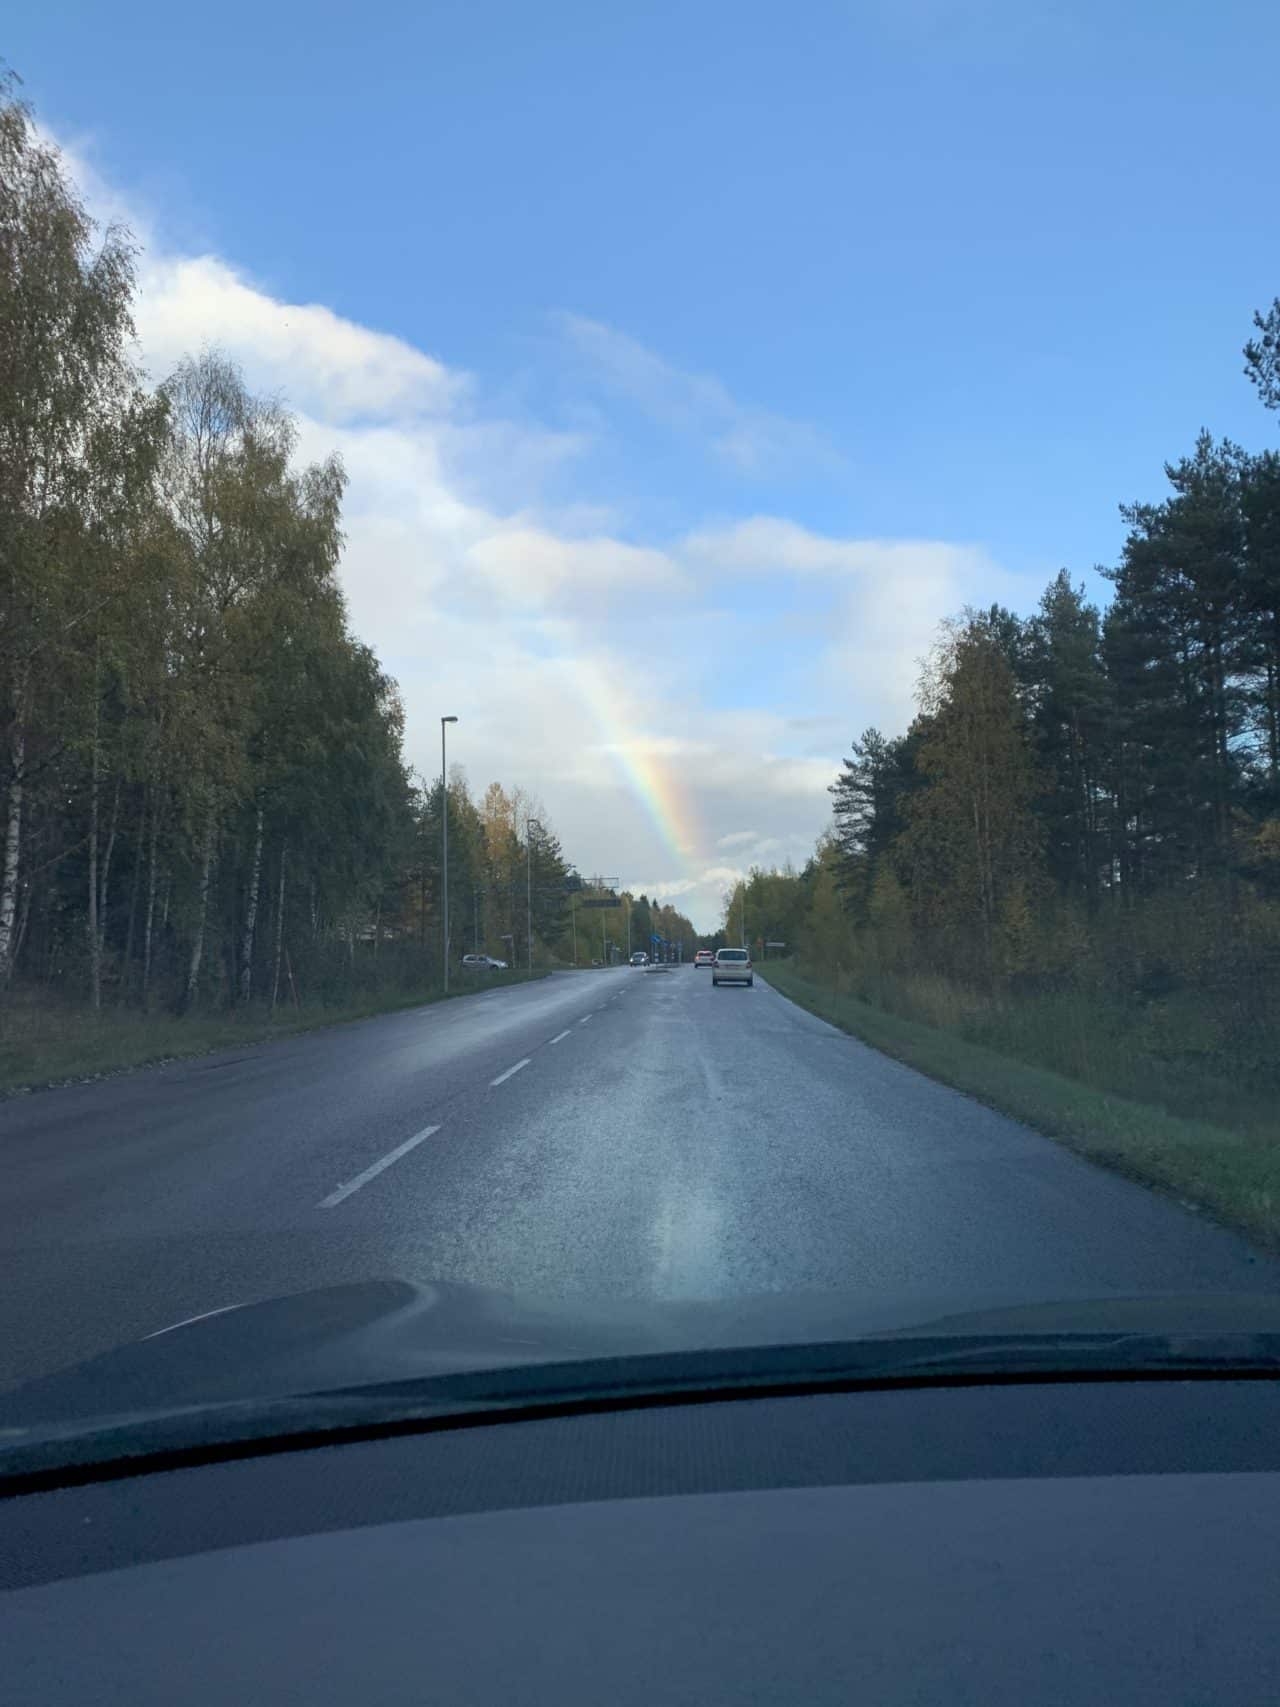 Driving Car After Rain With A Rainbow